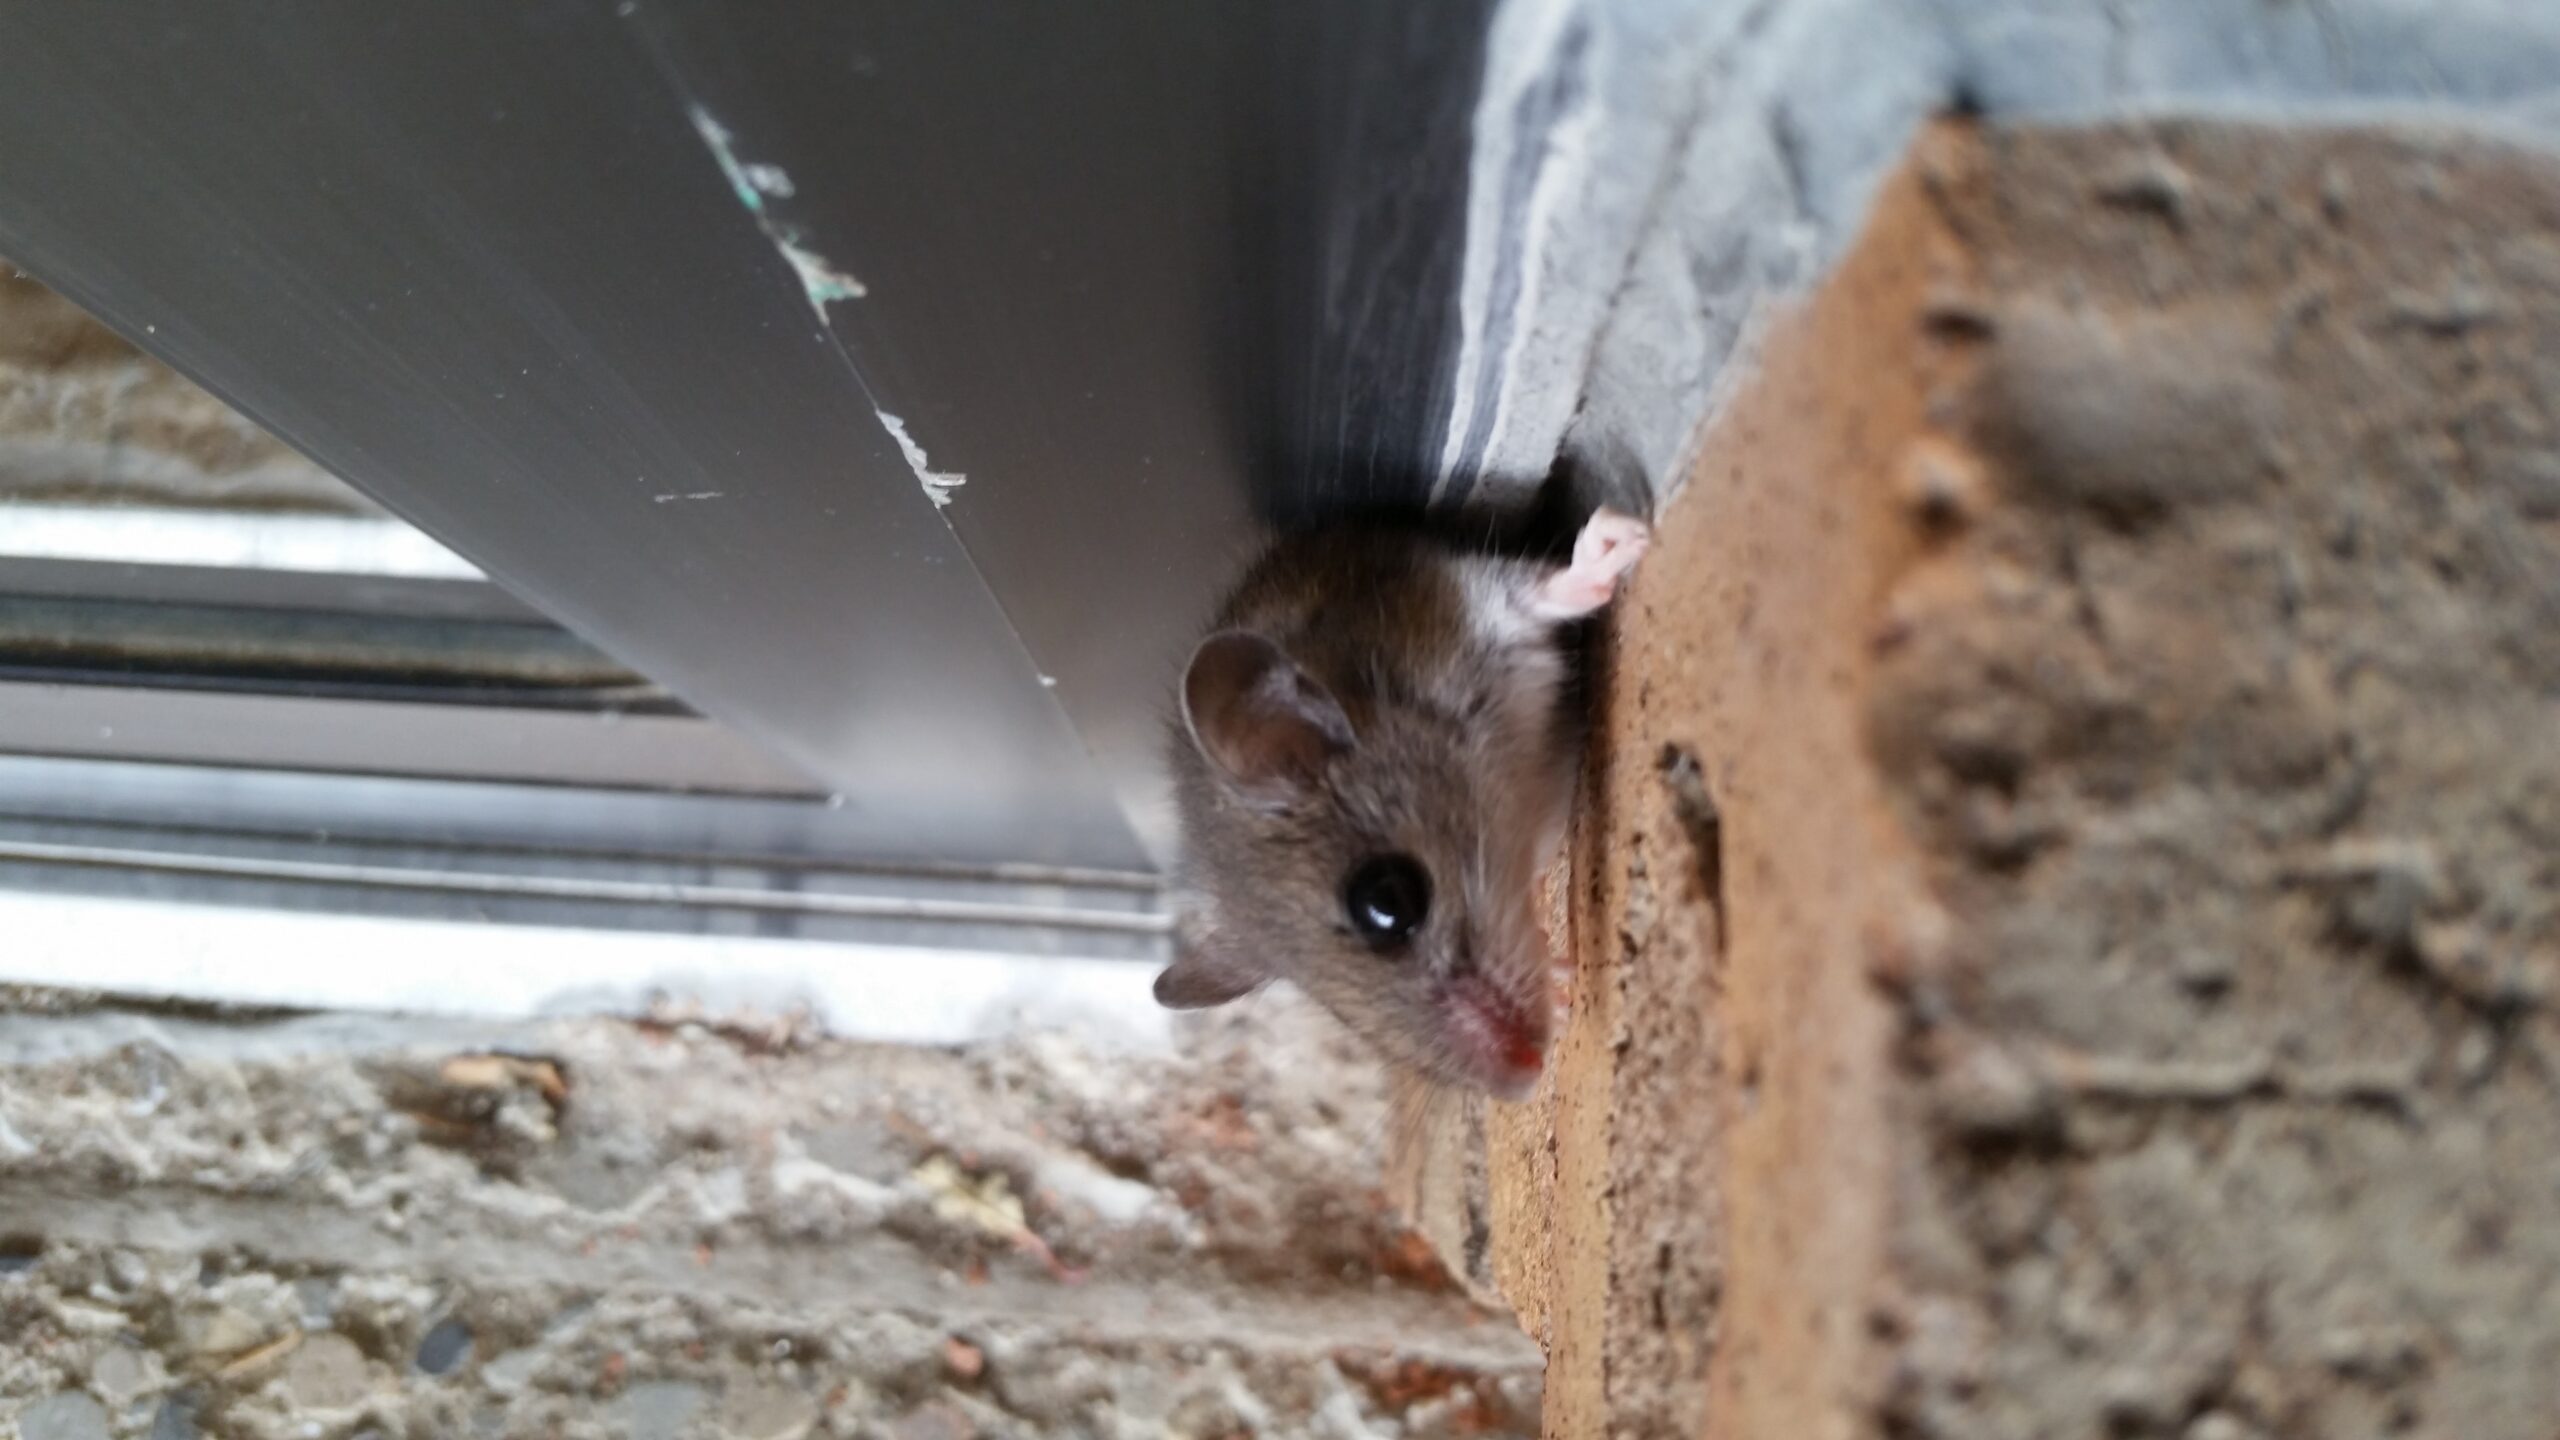 2021 Best Way to Keep Mice Away from Your Home - HomeAdvisor